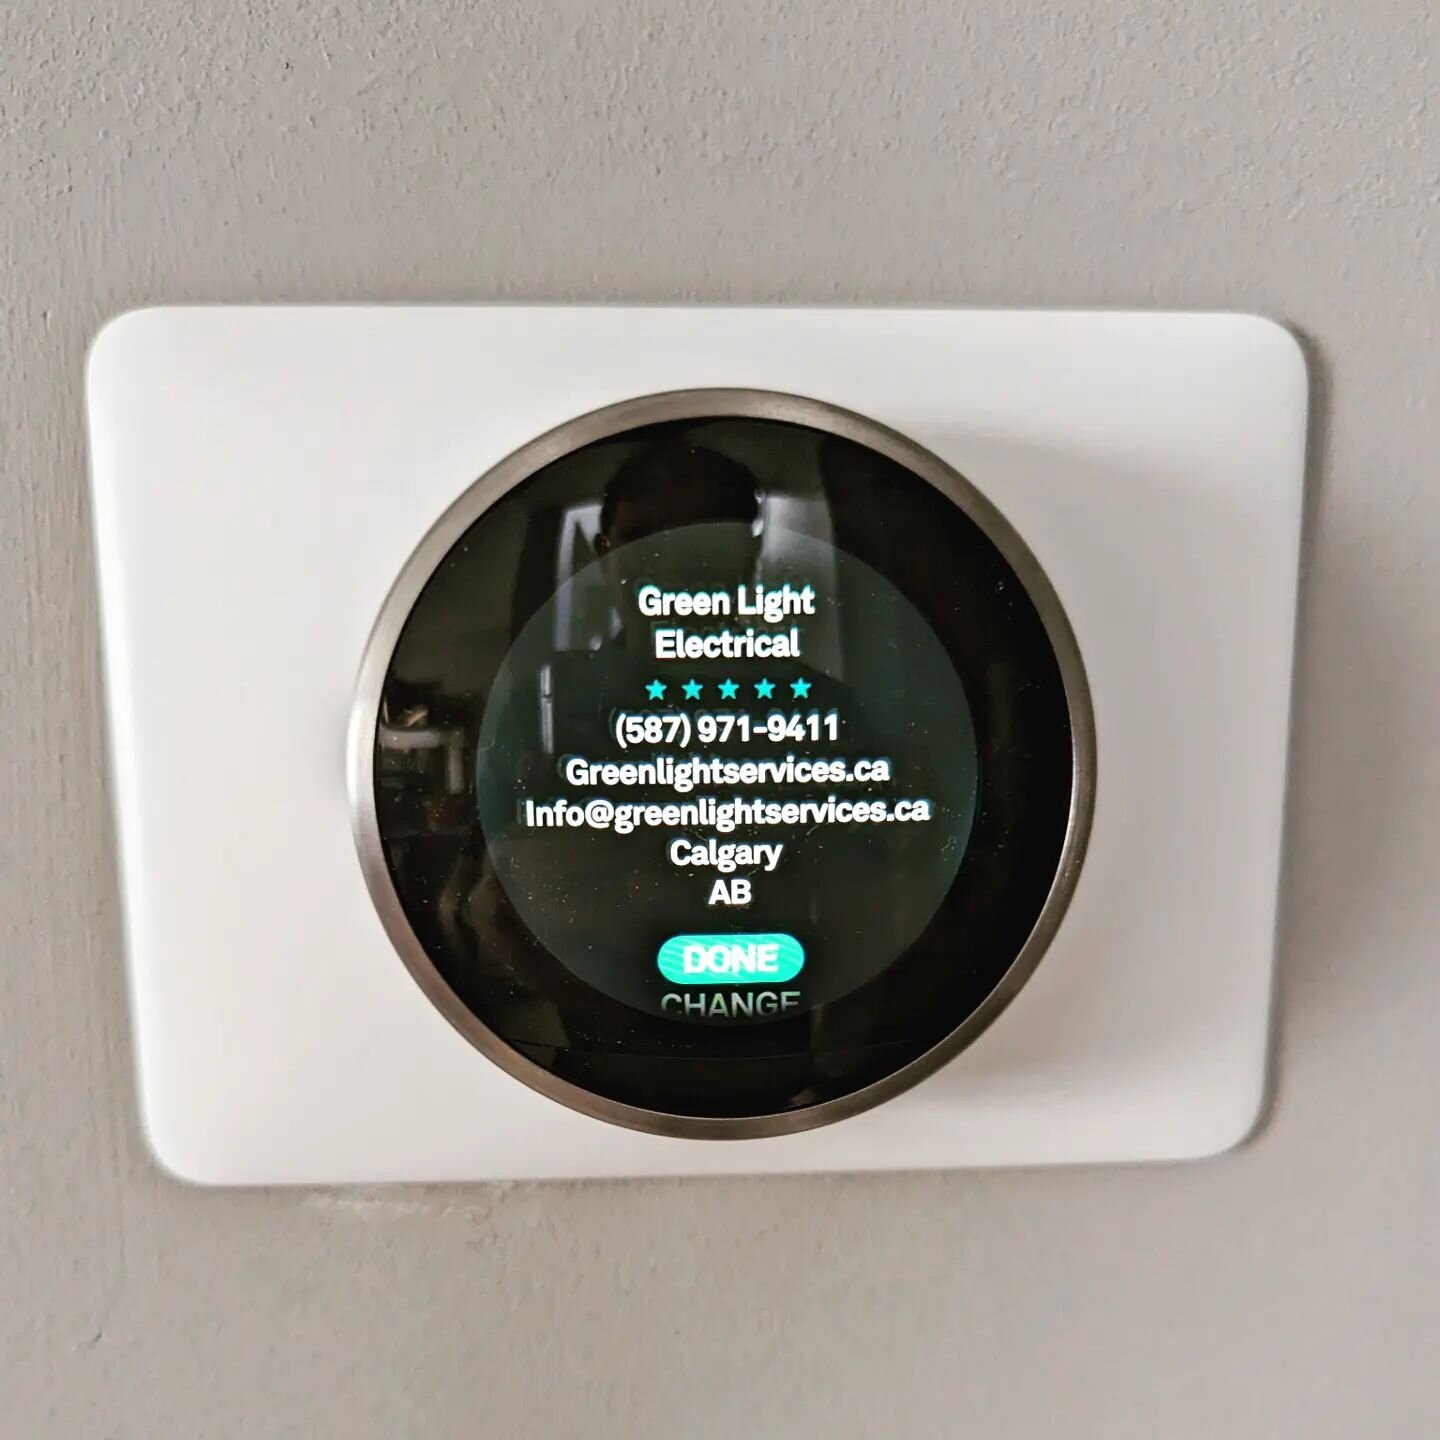 Google Nest Smart Thermostat @greenlight.ca

Can't wait to see what happens Nest! 

* Complete rewire
* Common Wire 
* Different controls

Greenlight Electrical Services ltd.
Your local GoogleNest pro if youre having trouble we will put the light on 